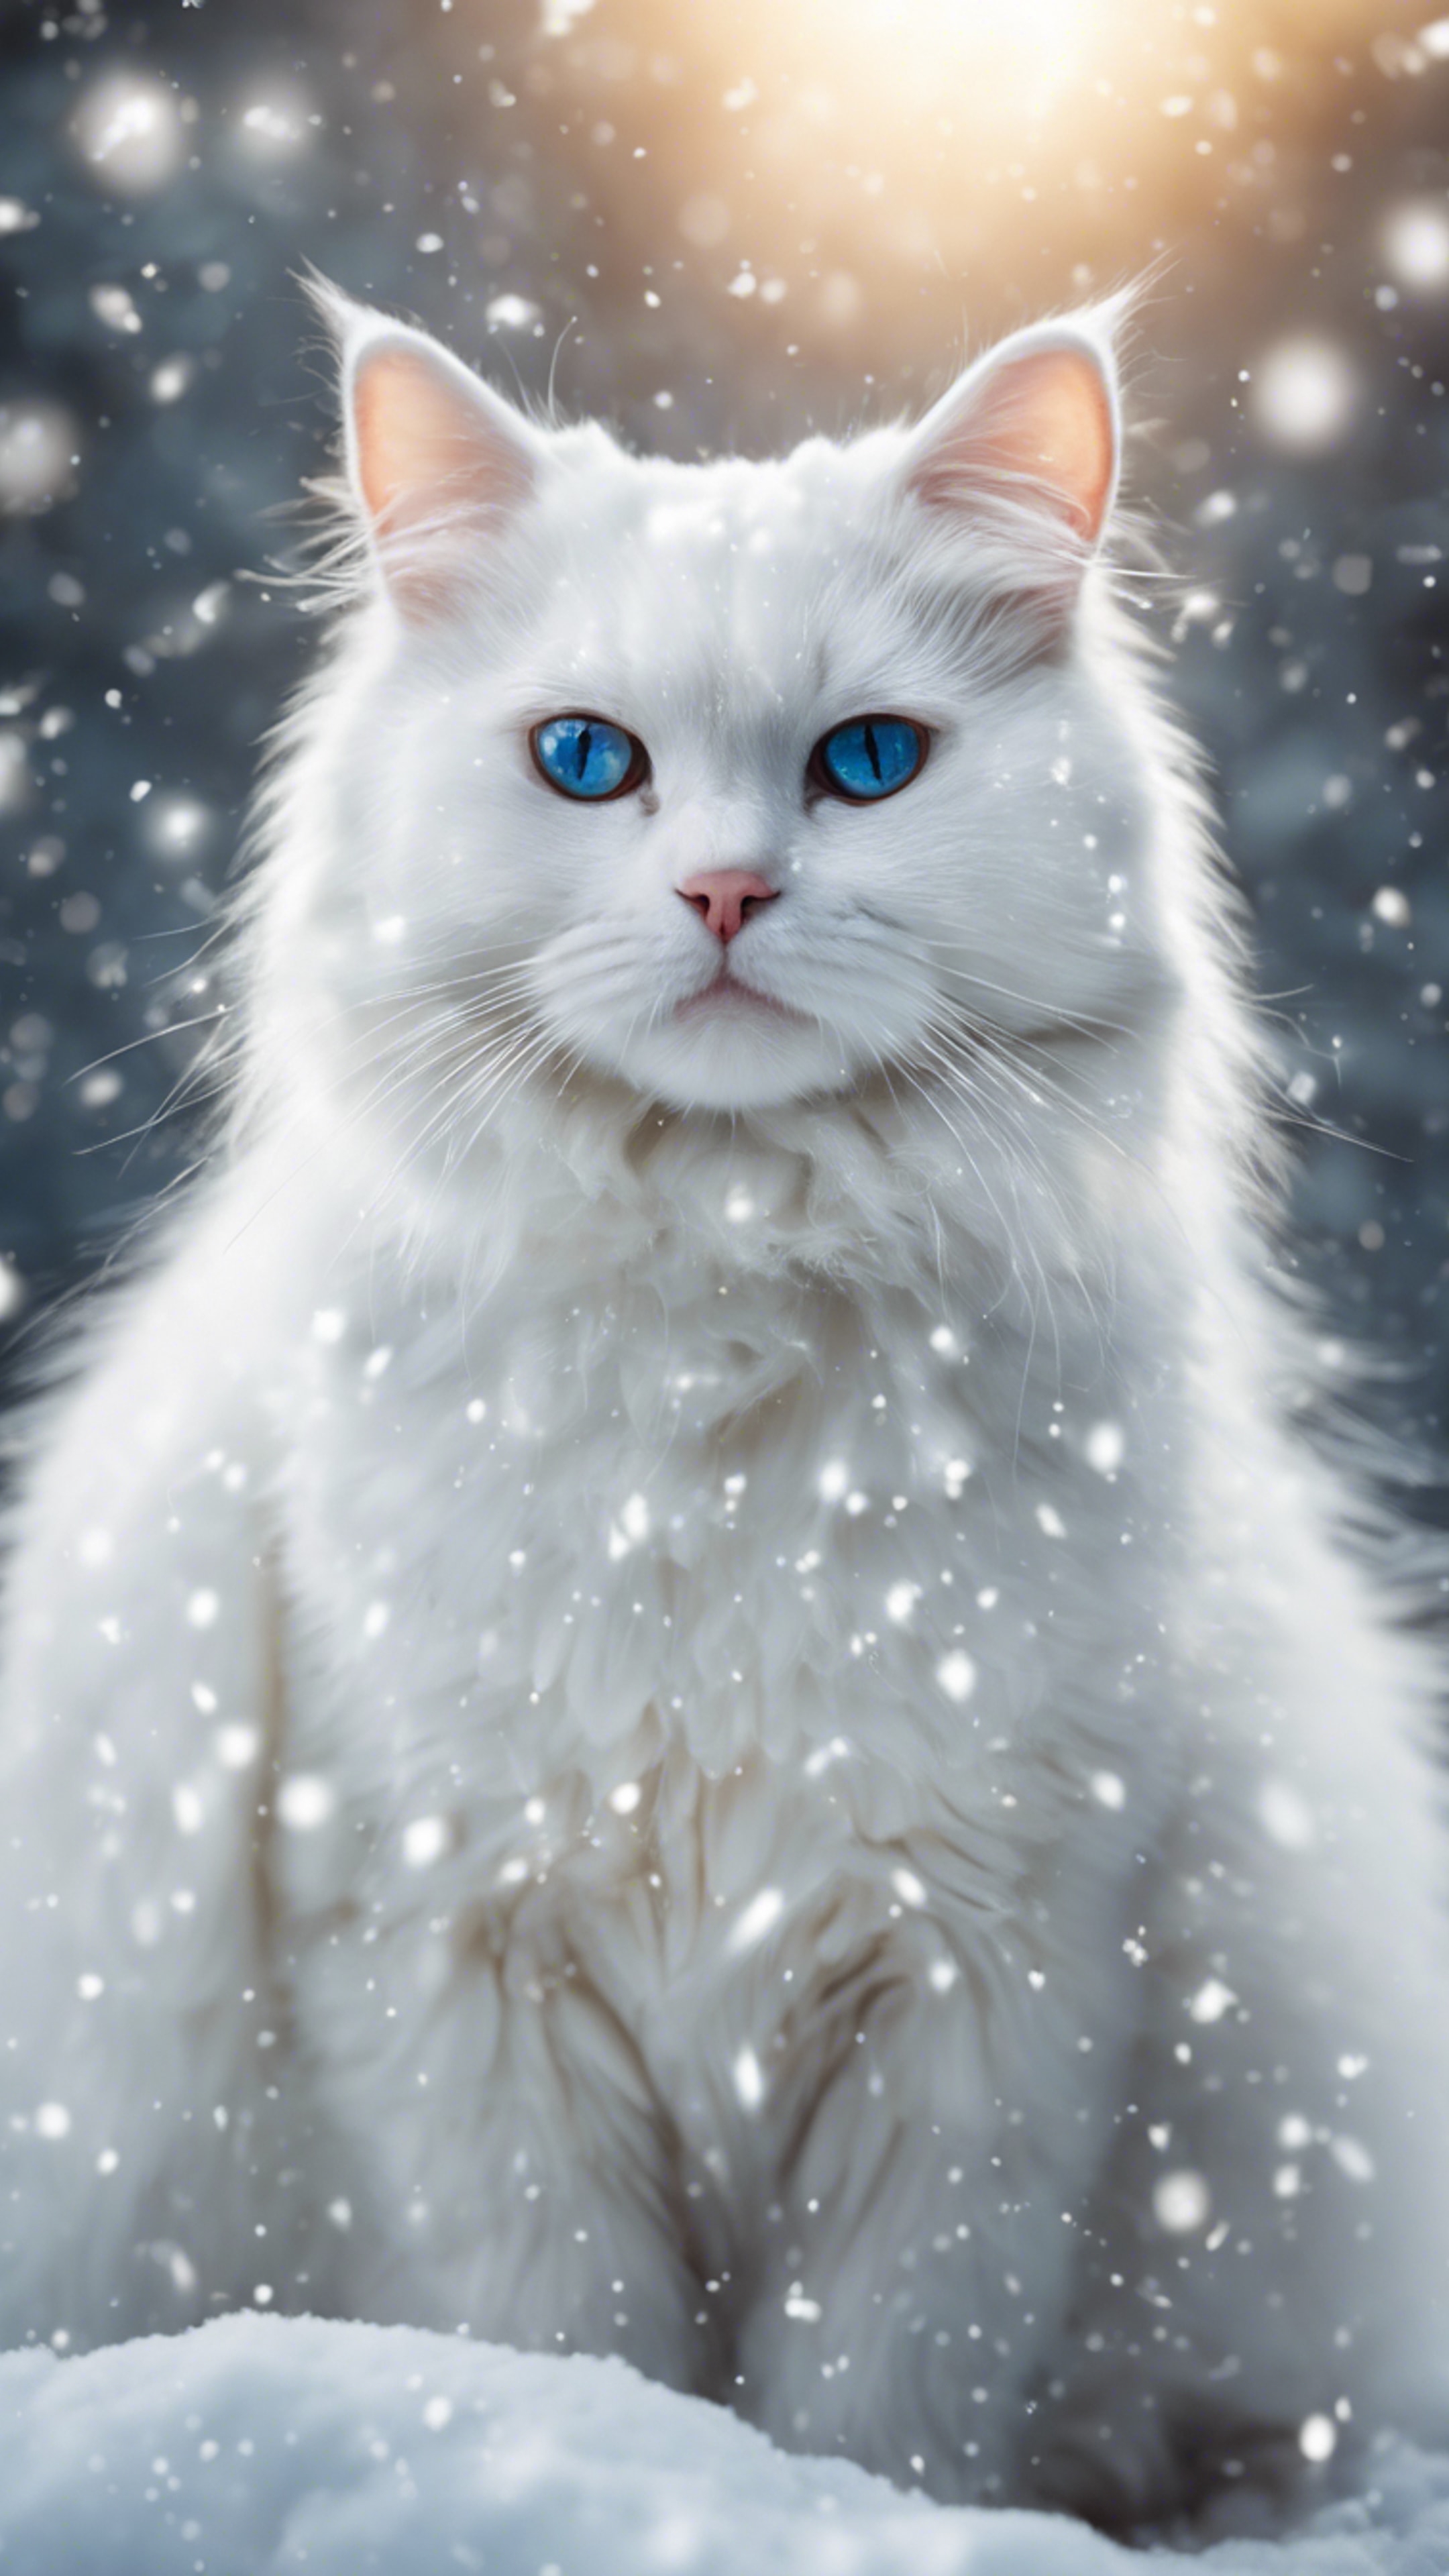 A fluffy white cat in the winter, amidst falling snowflakes. Обои[a246cb8c0cd2485b96c3]